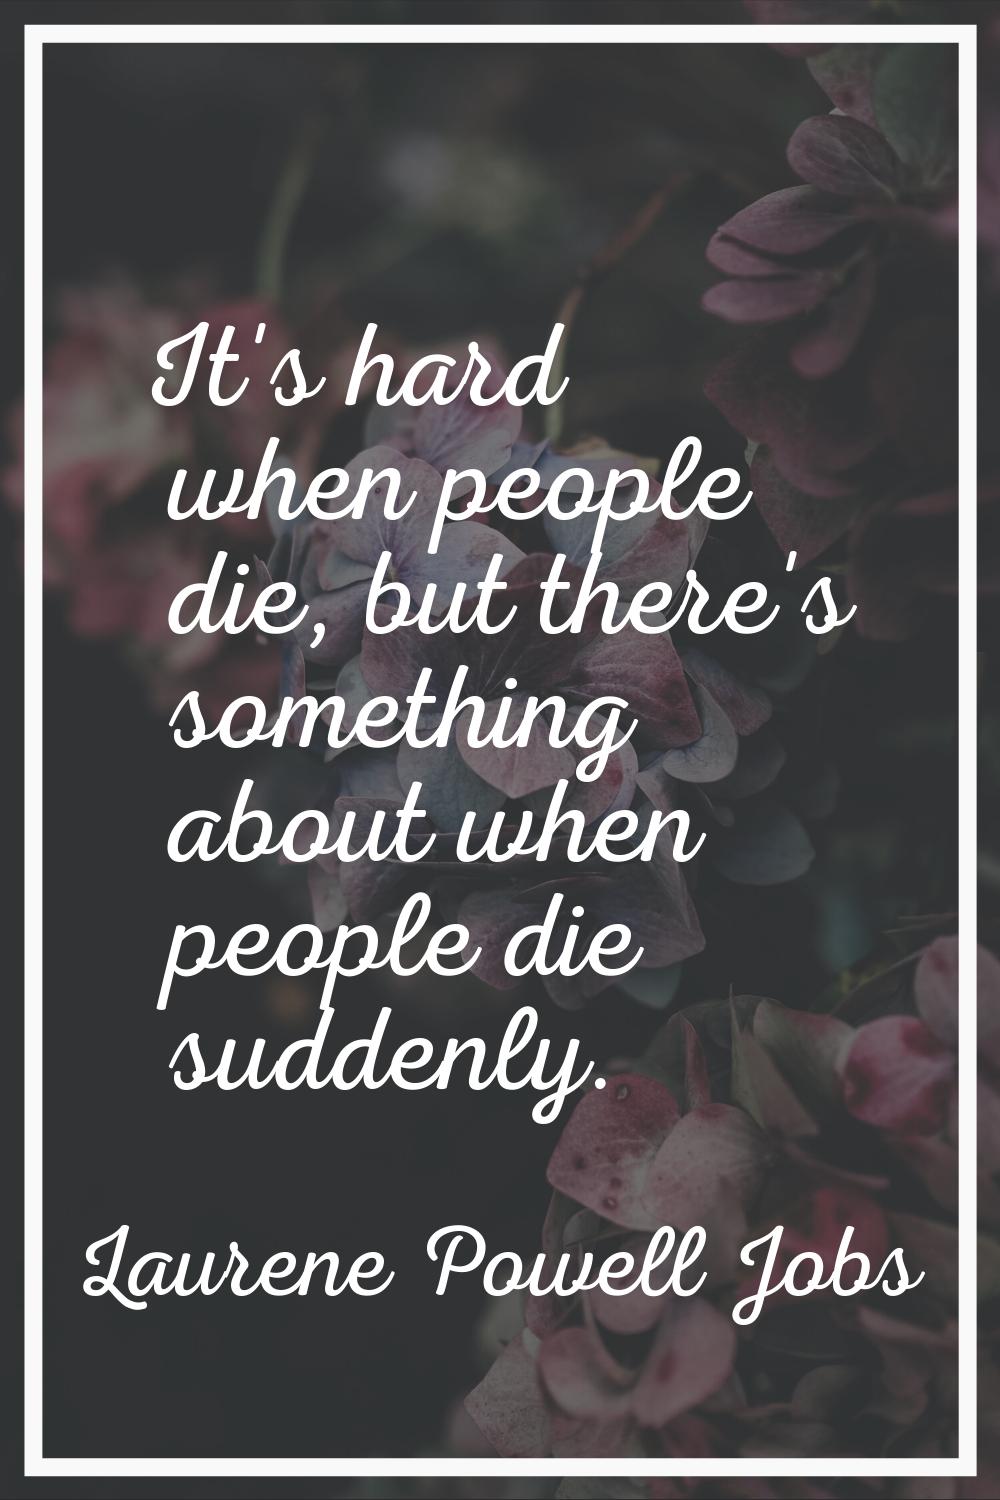 It's hard when people die, but there's something about when people die suddenly.